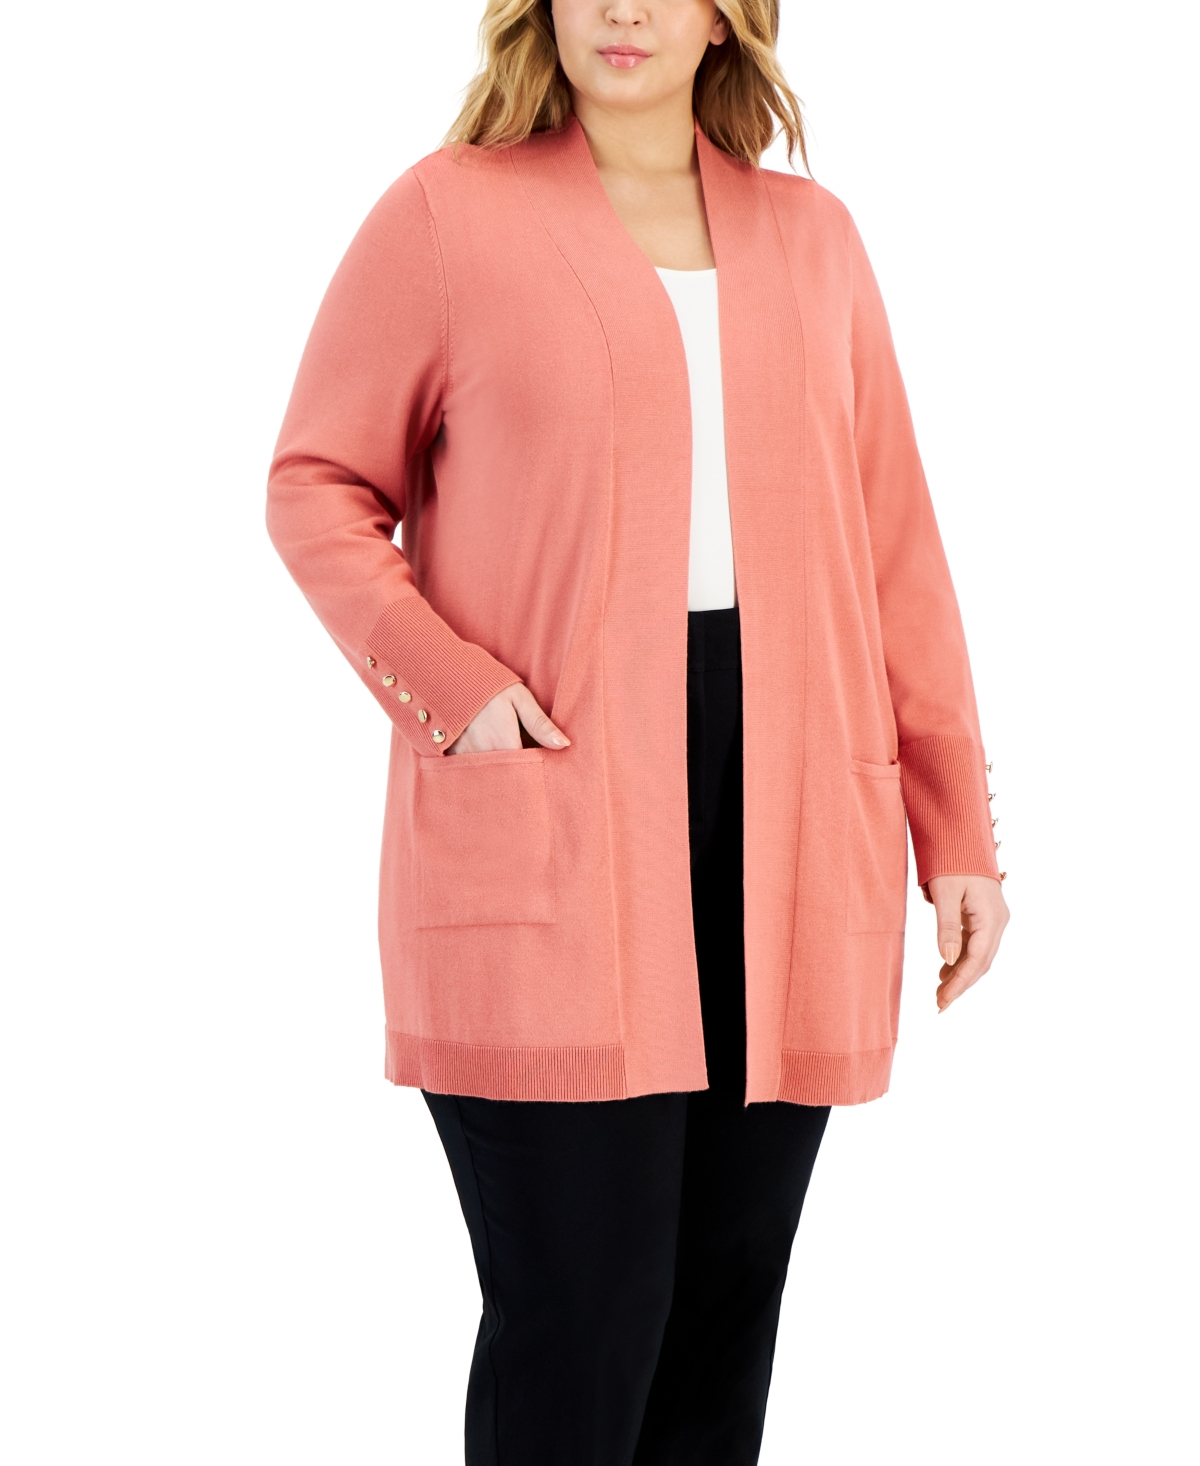 Plus Size Open-Front Long-Sleeve Cardigan, Created for Macy's - Burnt Brick